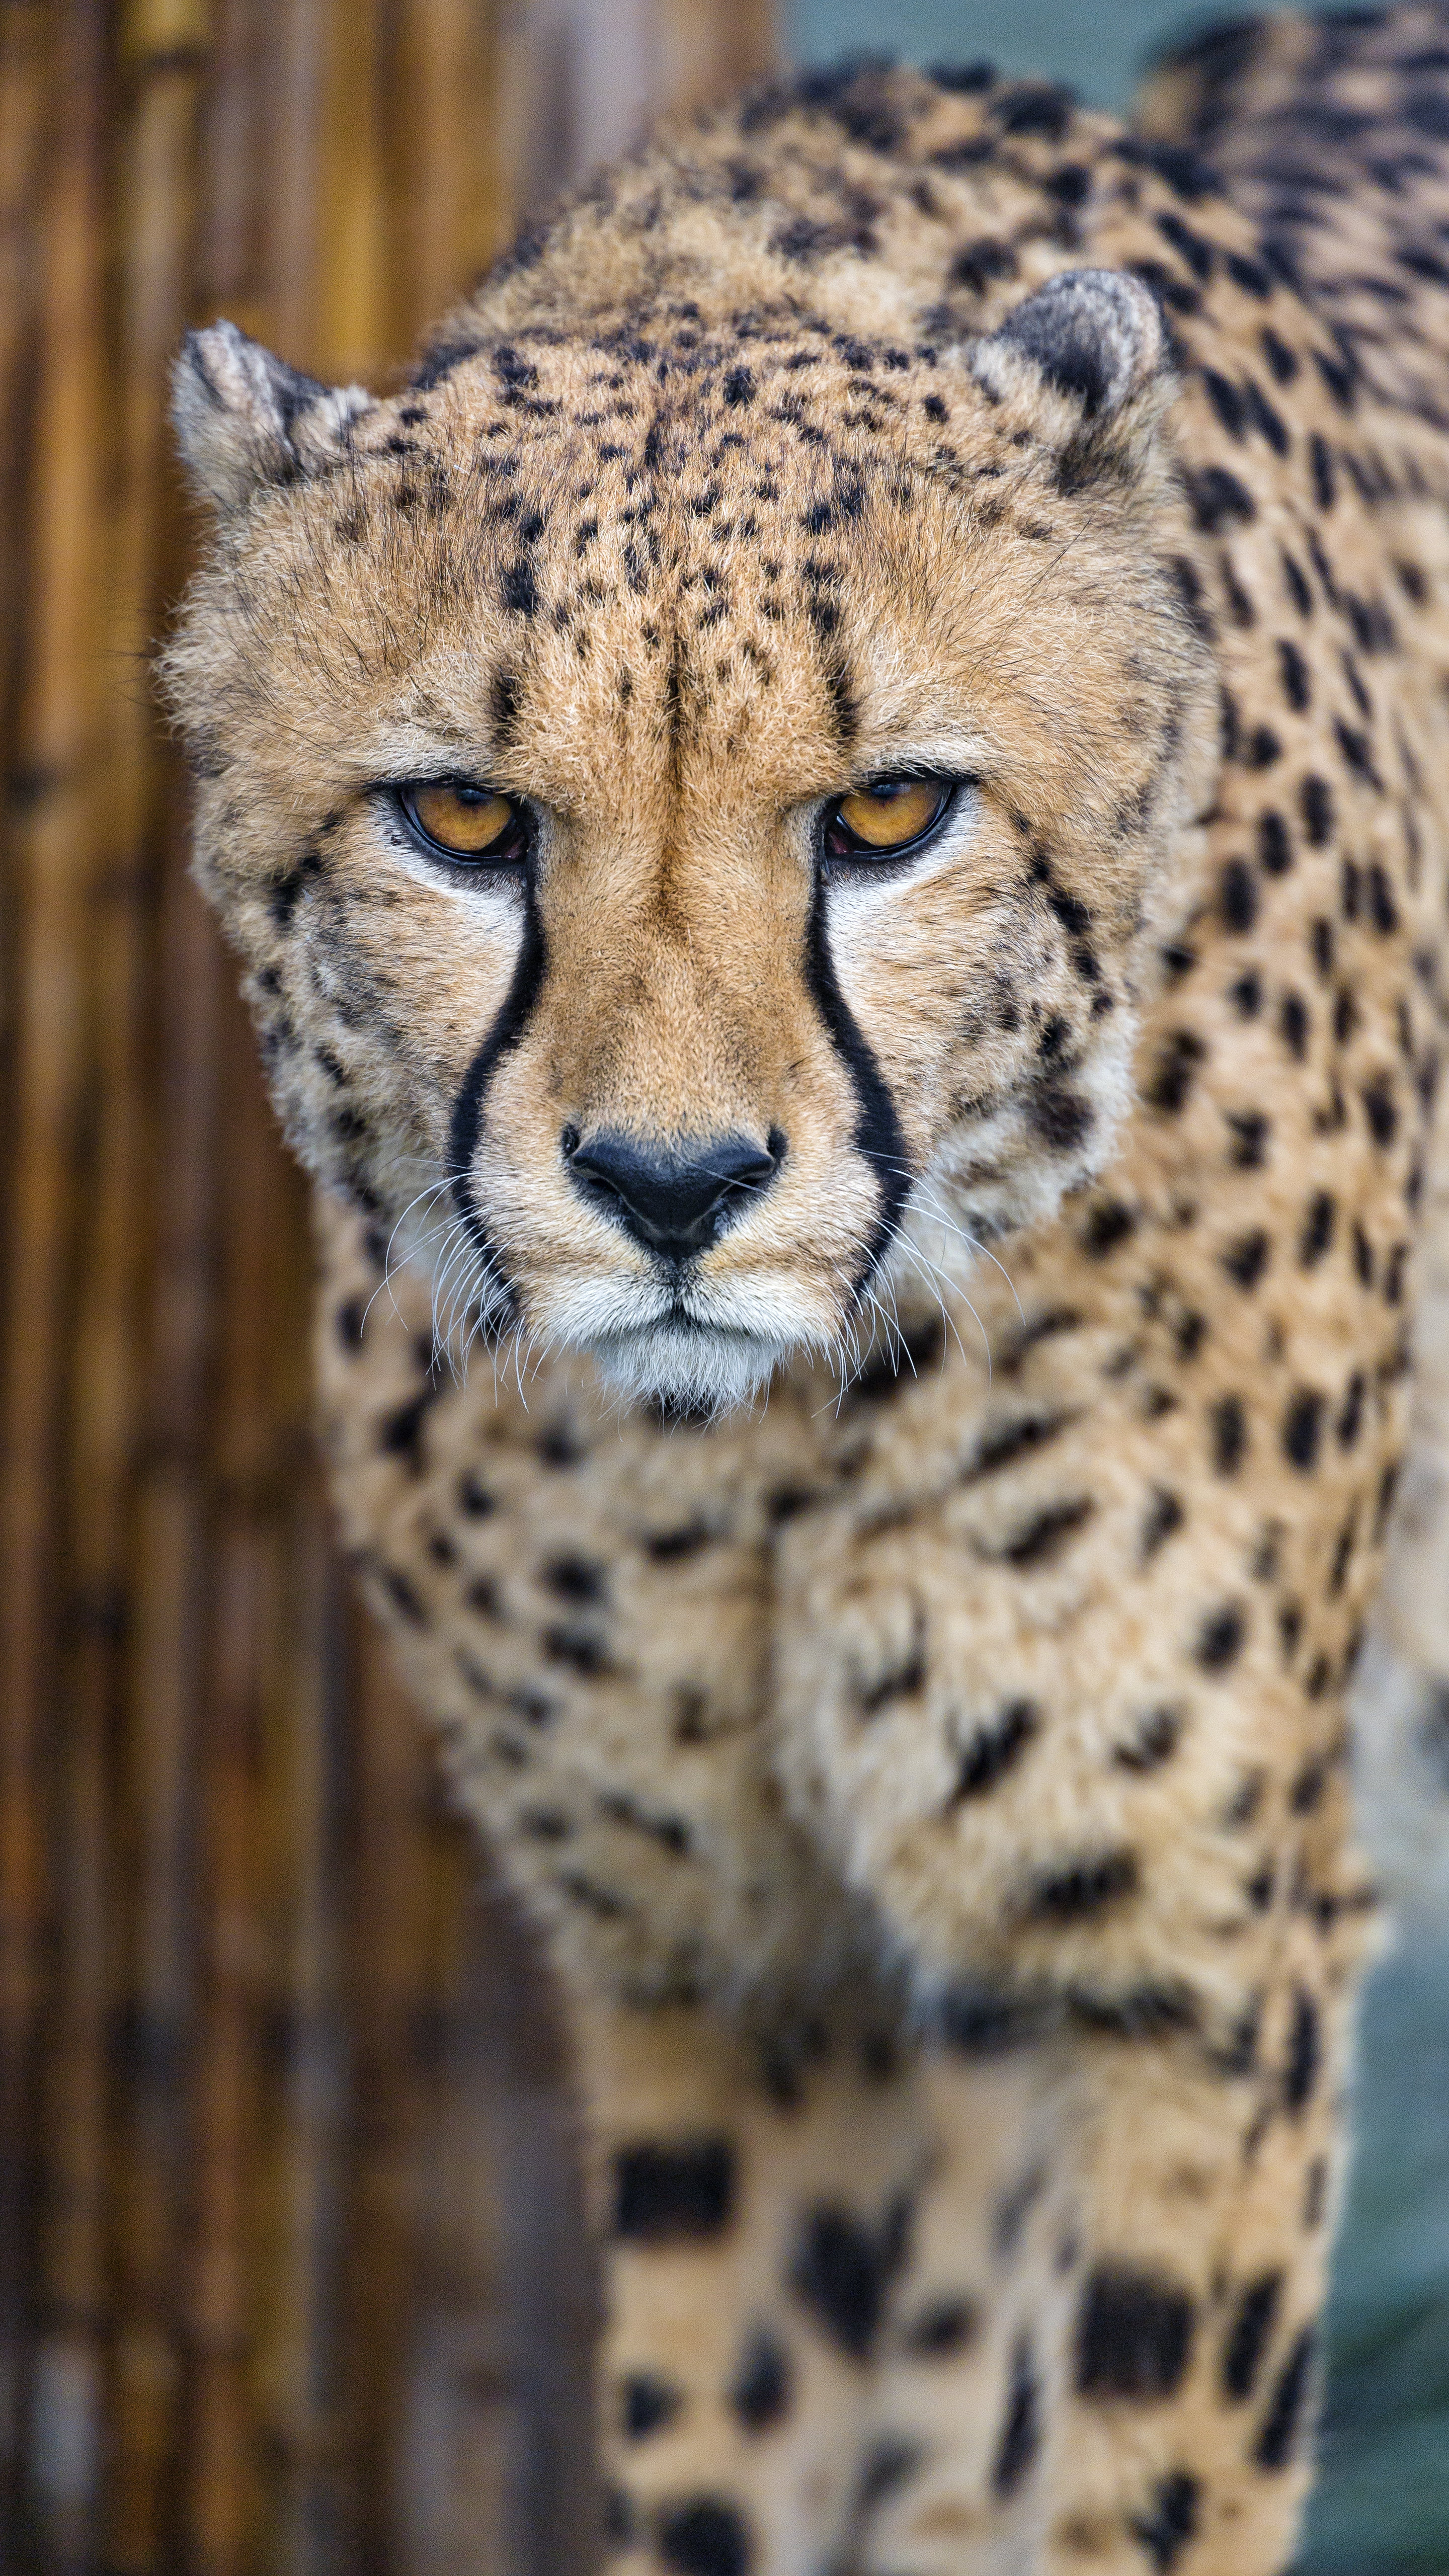 Download cheetah s for ile phone free cheetah hd pictures